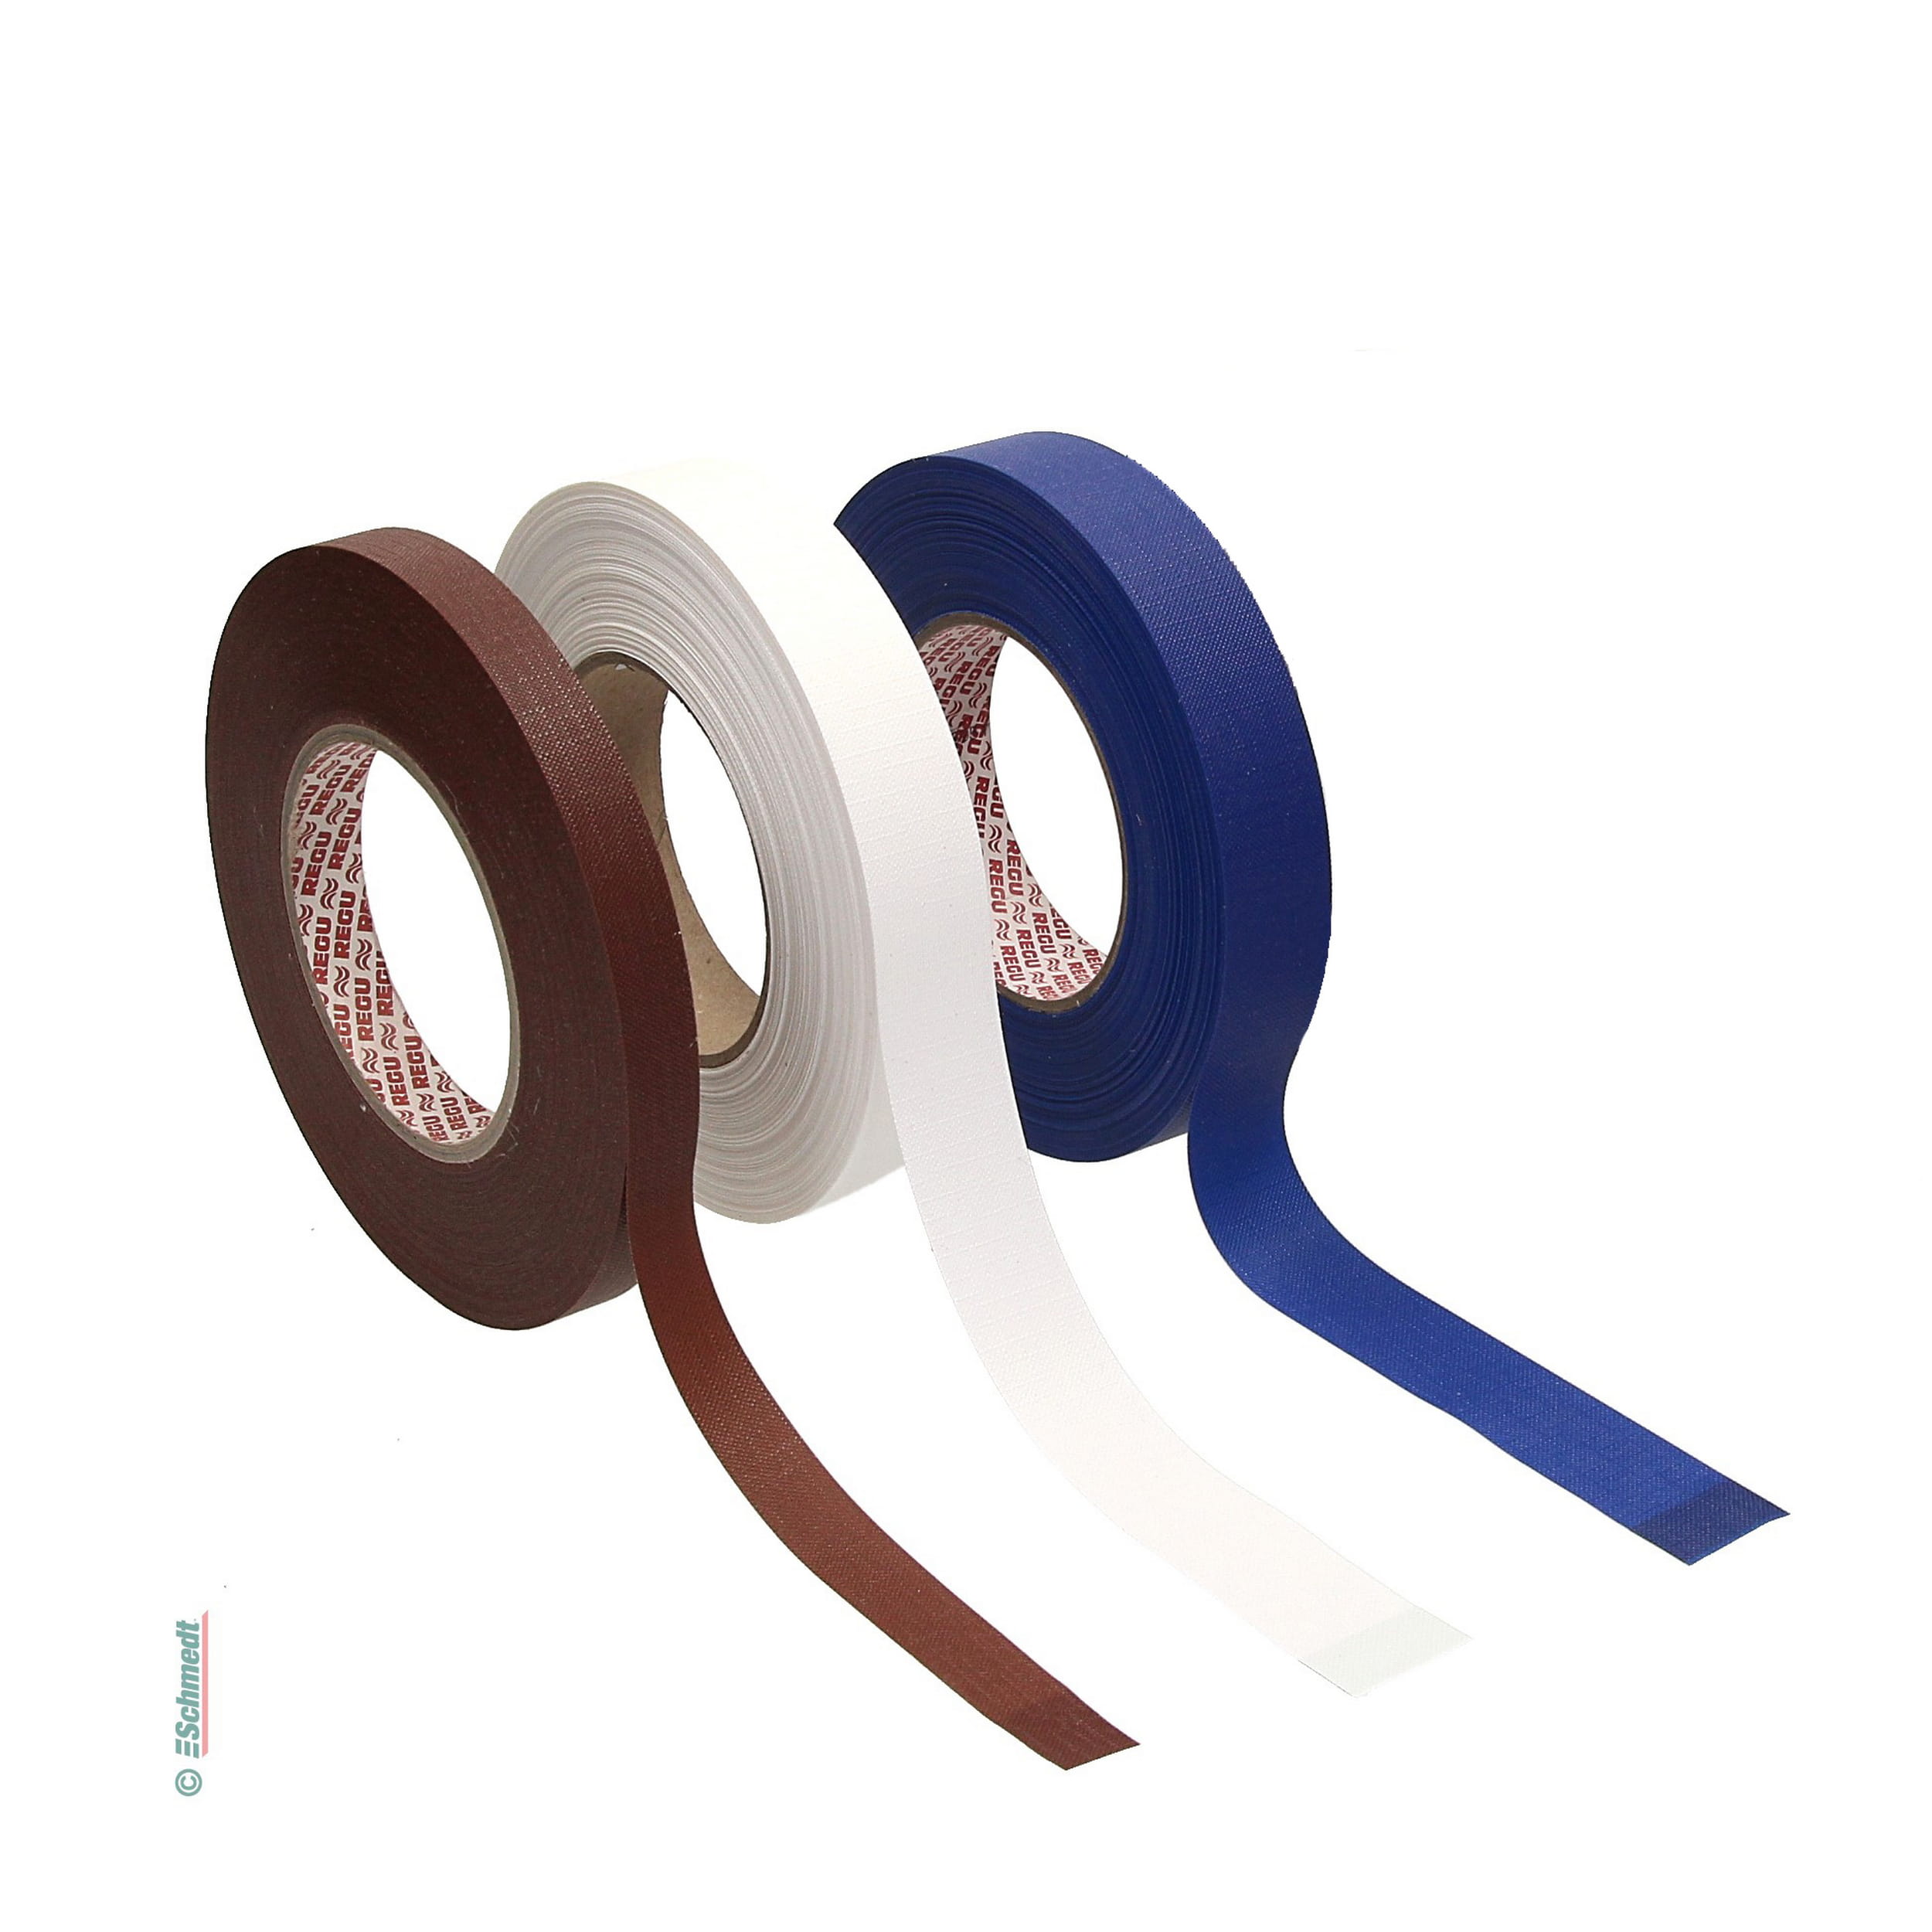 Book Binding Tape - Book Binding Adhesive Tape Latest Price, Manufacturers  & Suppliers